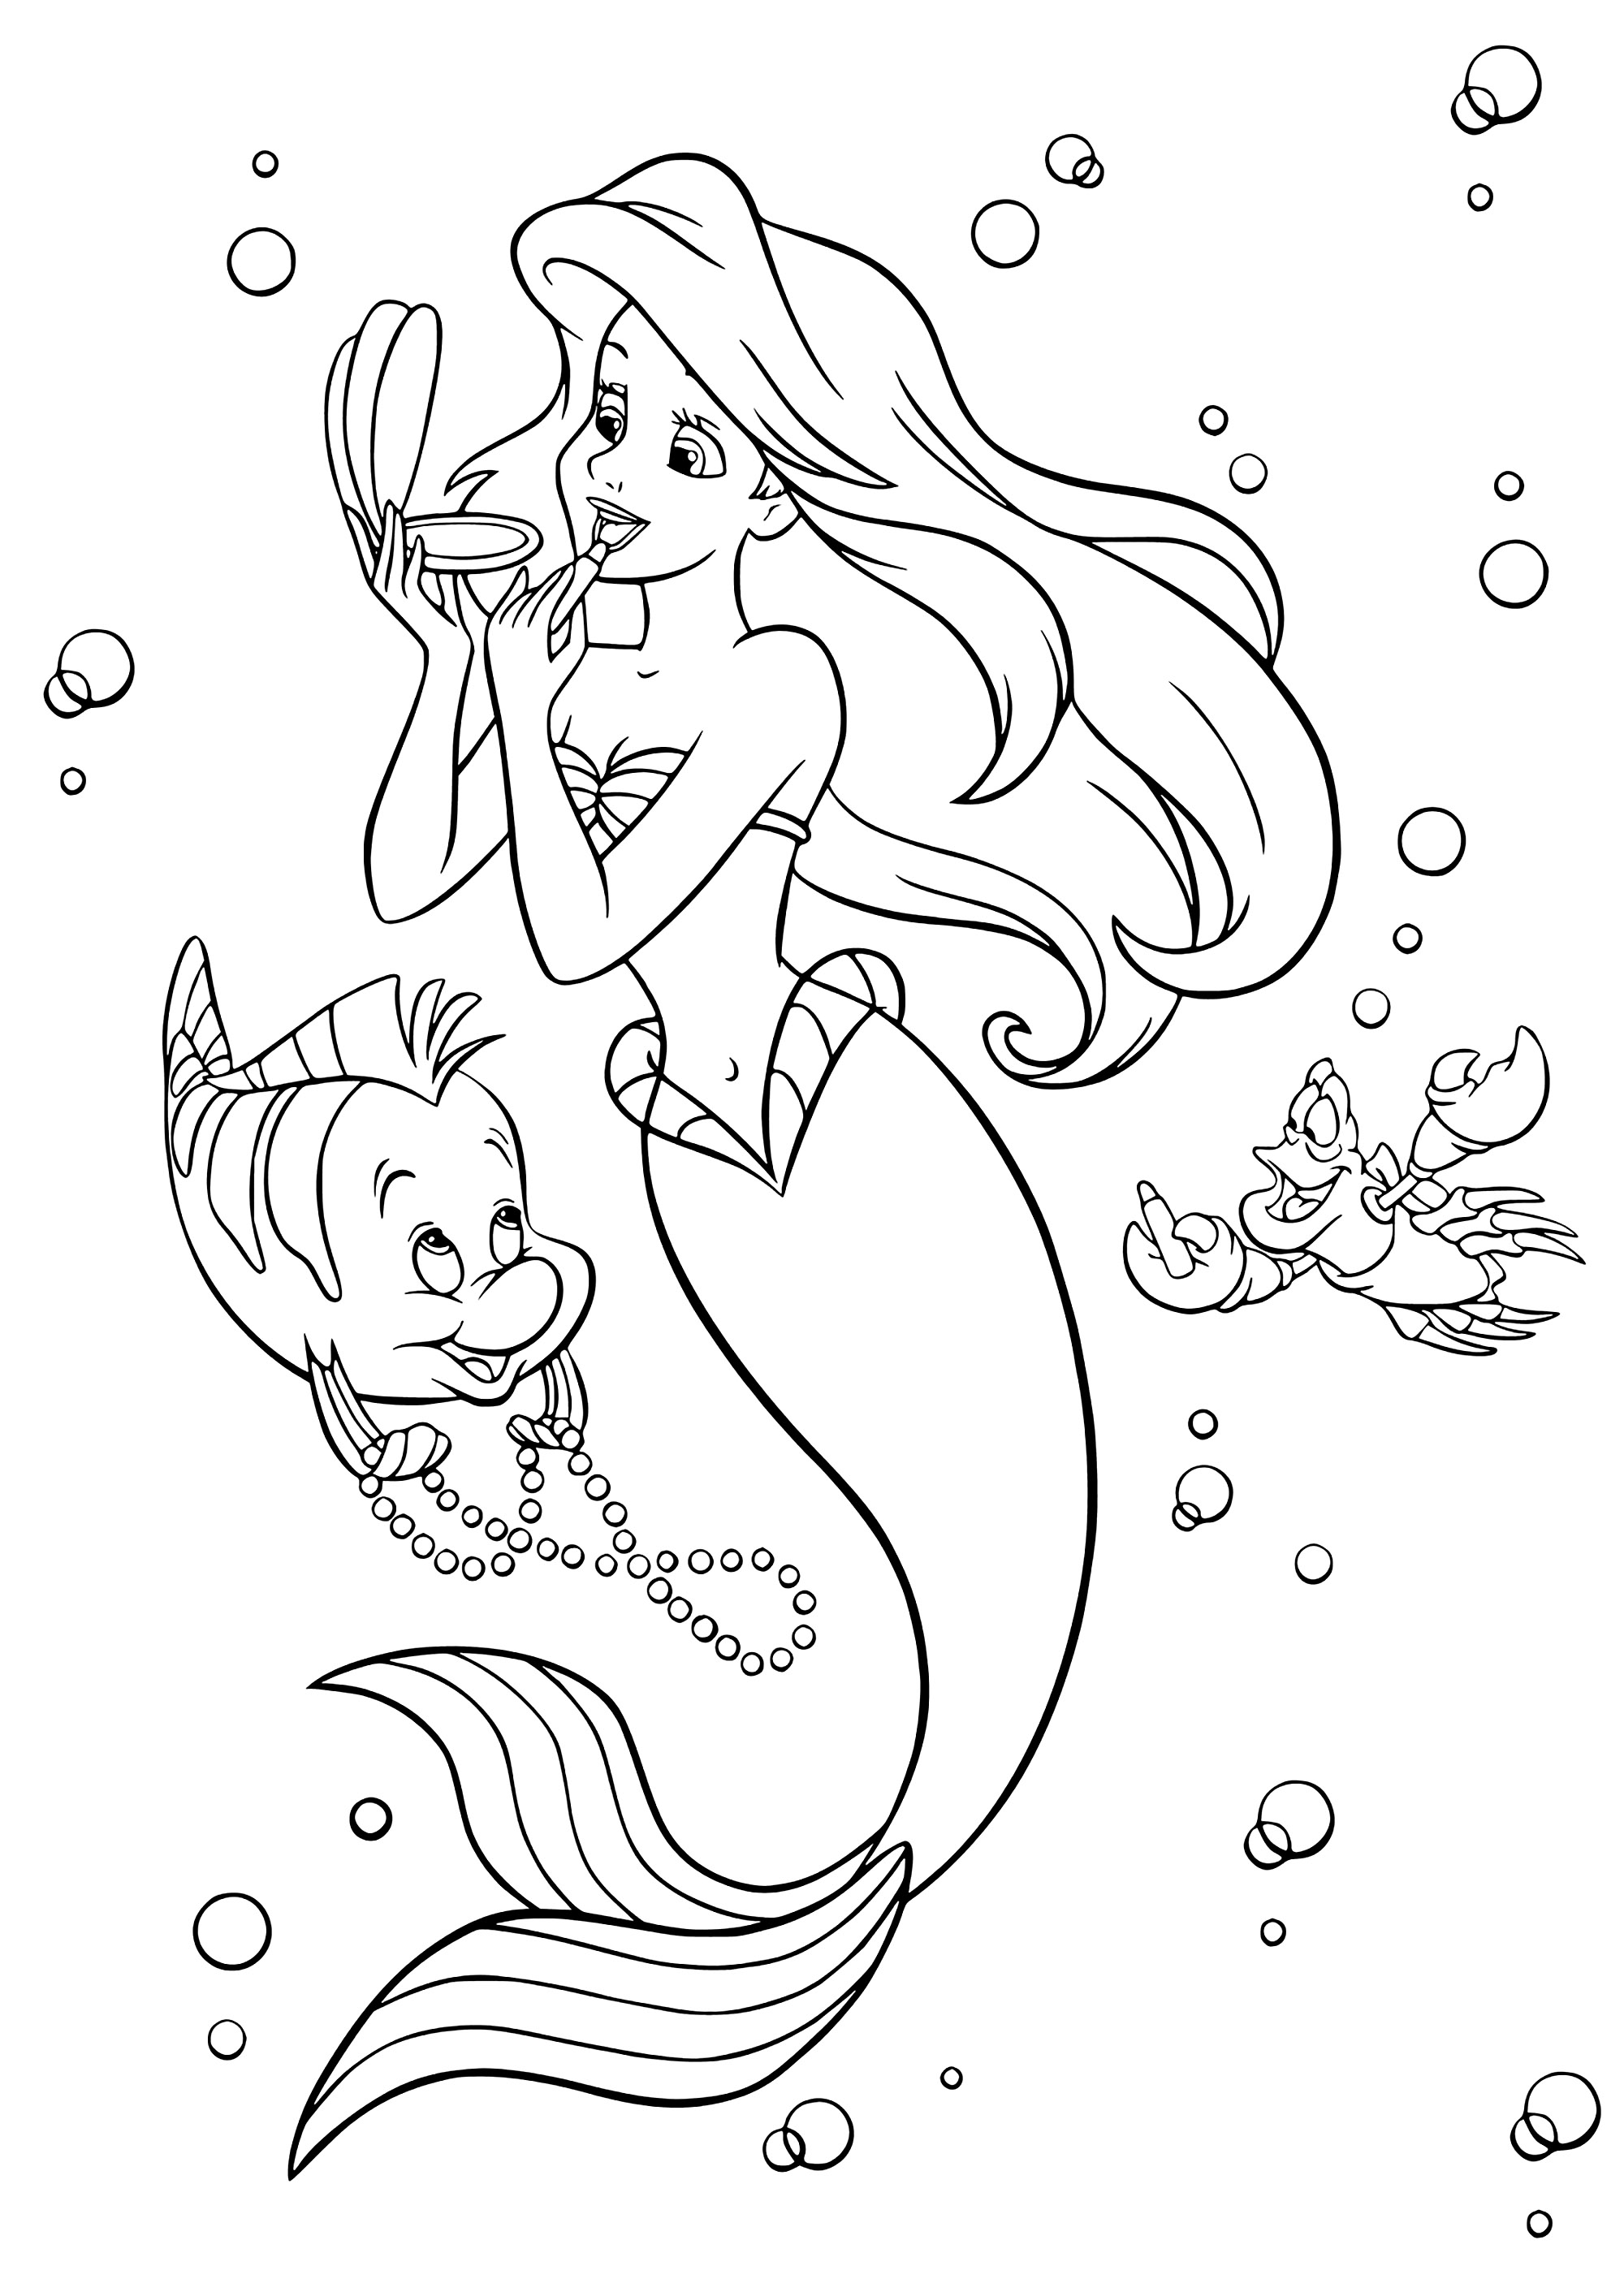 Ariel with friends, putting on make-up for Eric. Color in Ariel, as well as Polochon the fish and Sebastian the lobster.